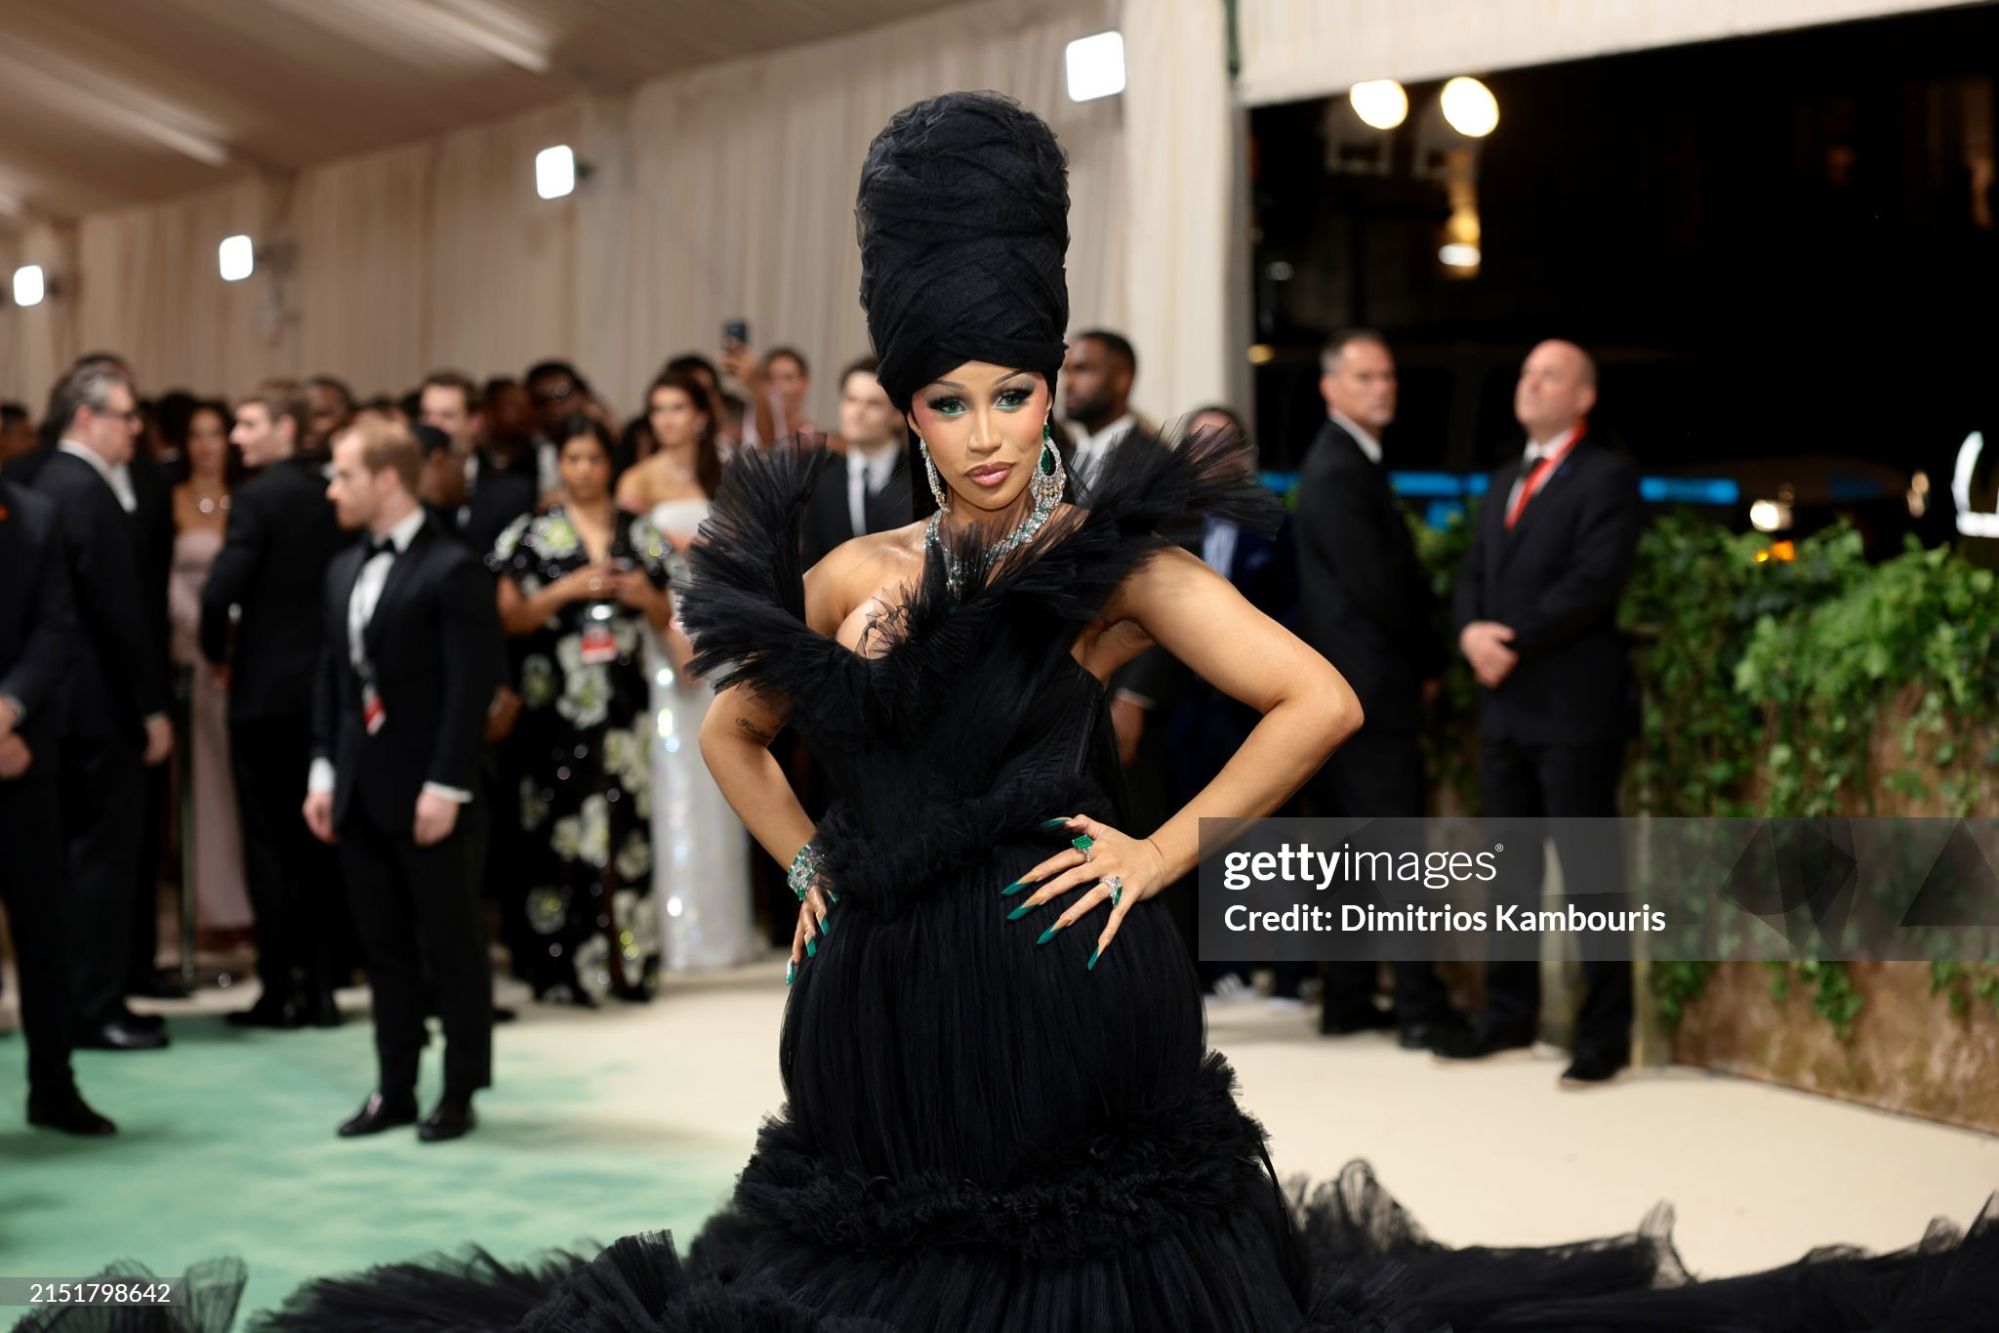 gettyimages-2151798642-2048x2048.jpg